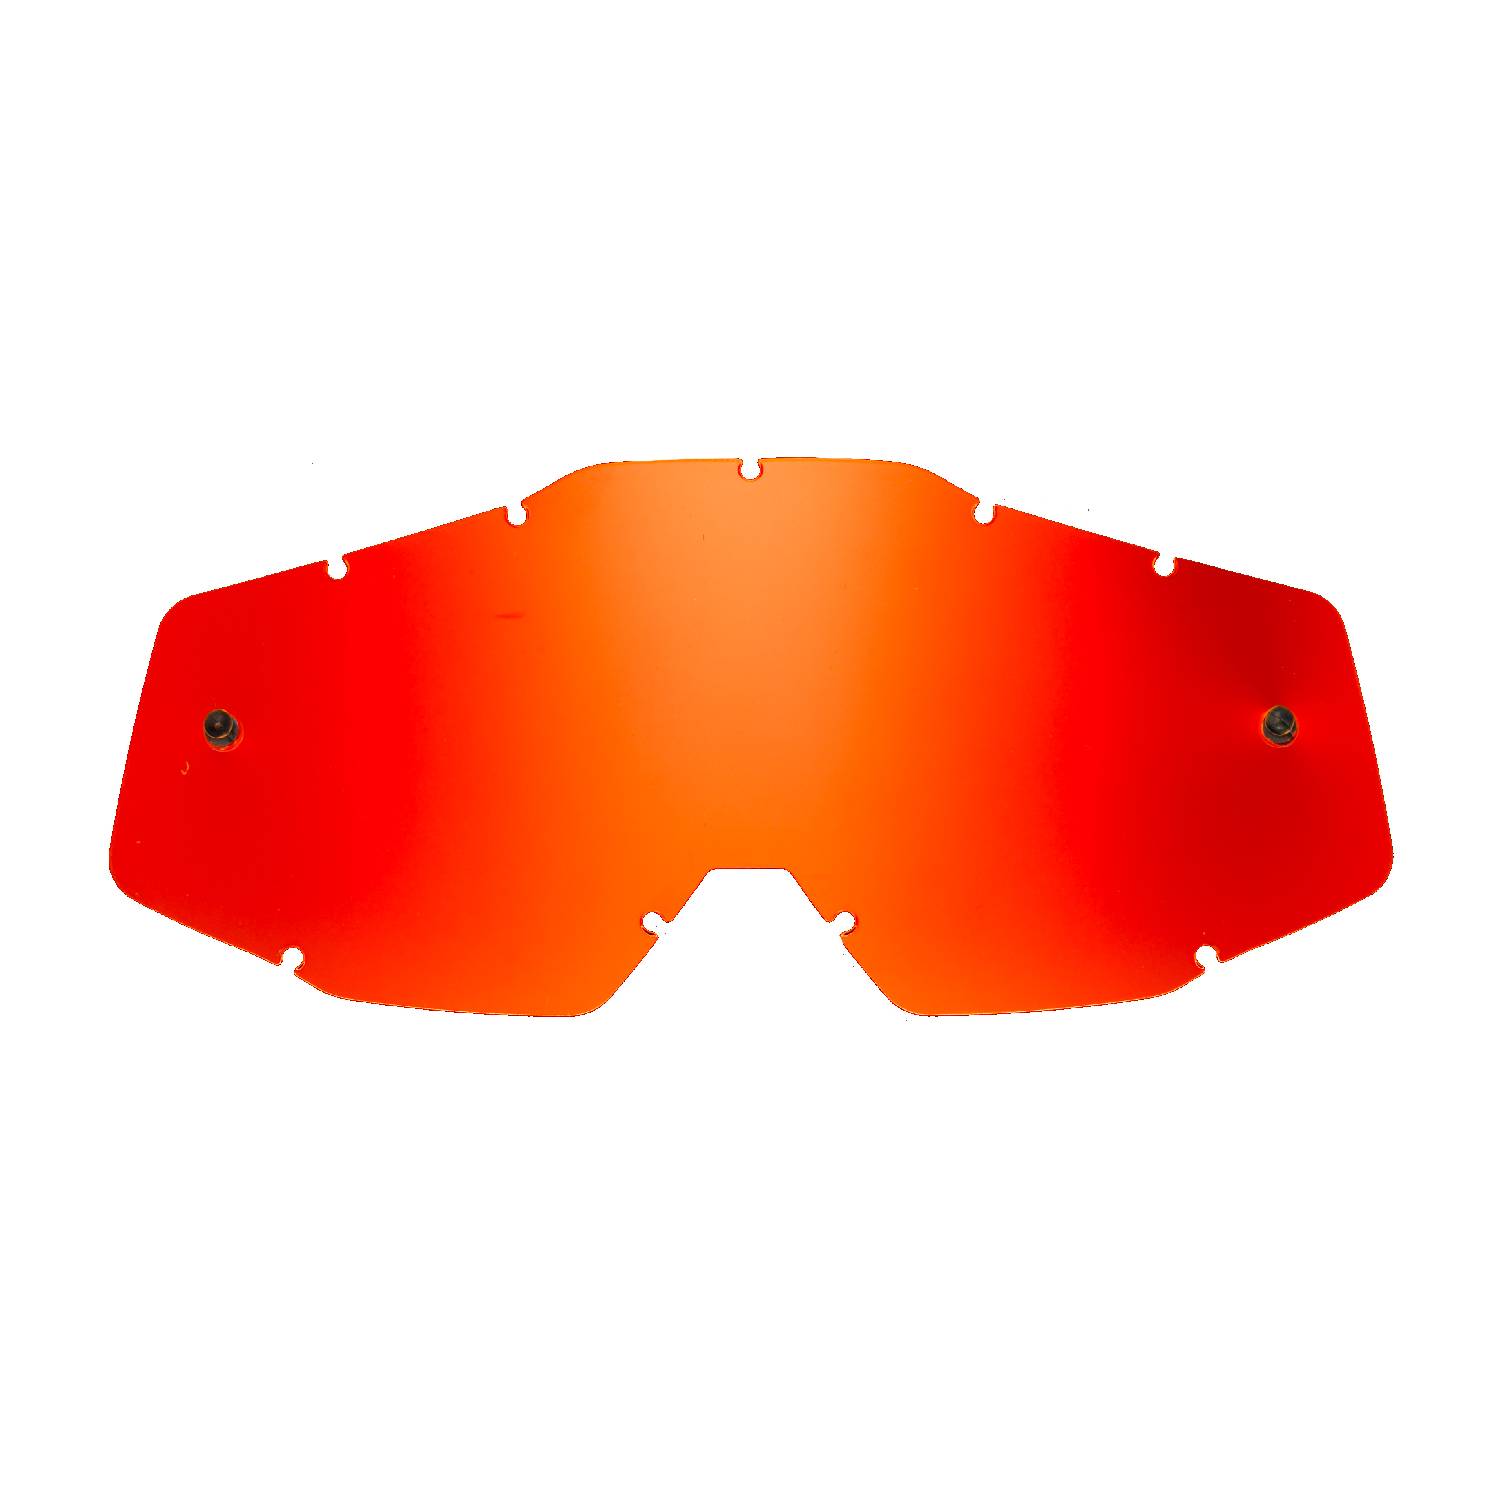 red-toned mirrored replacement lenses for goggles compatible for 100% Racecraft / Strata / Accuri / Mercury goggle